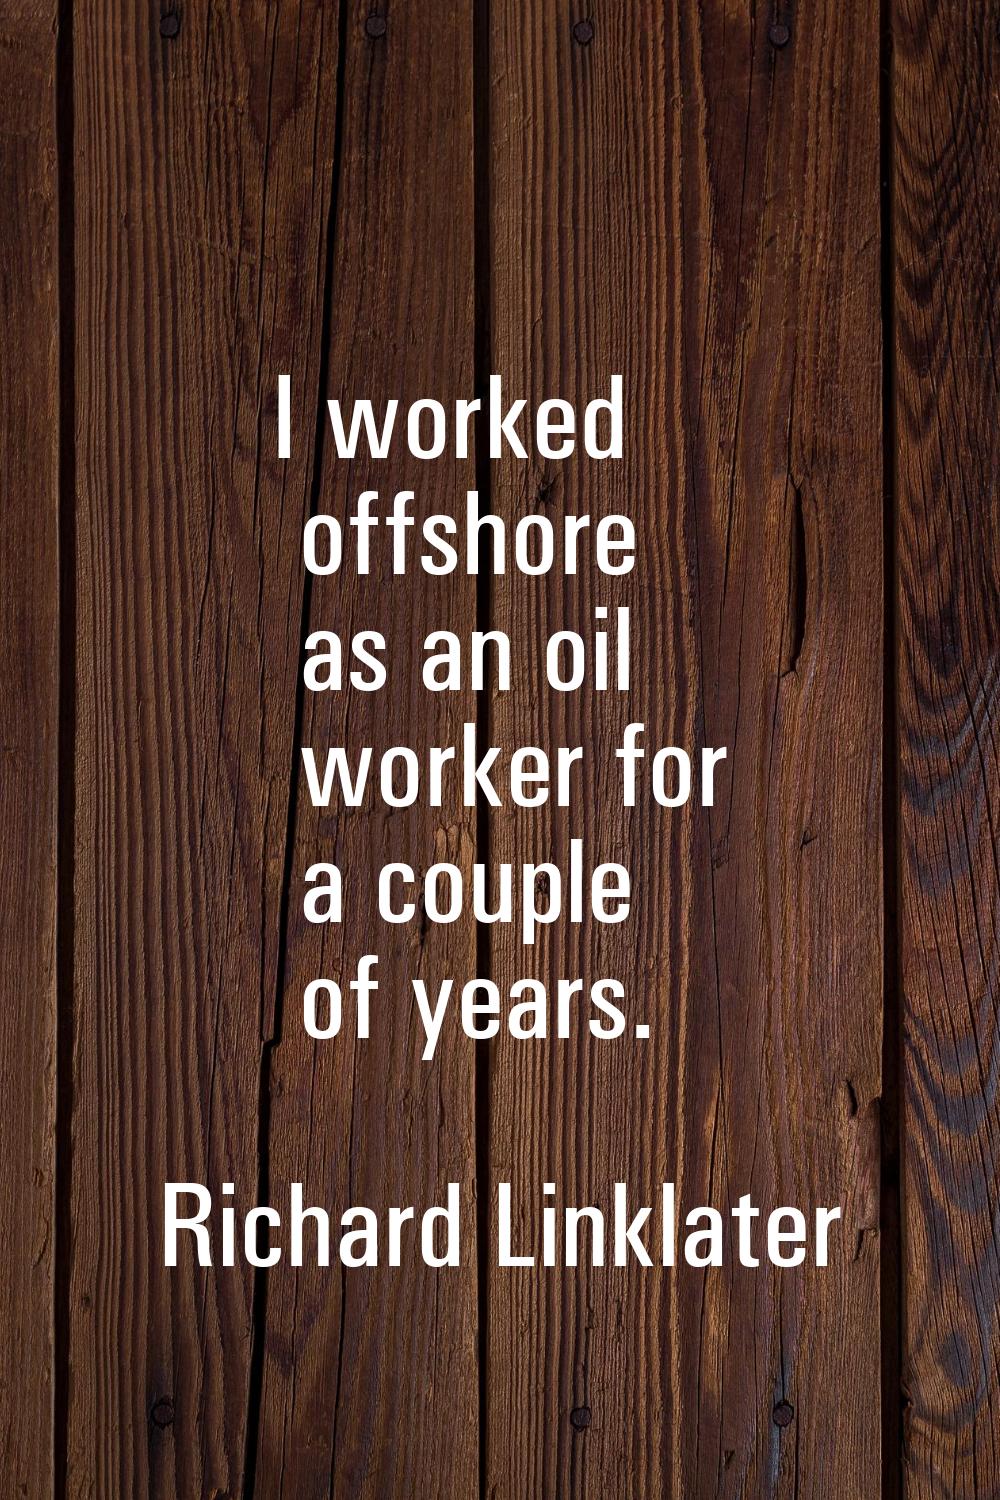 I worked offshore as an oil worker for a couple of years.